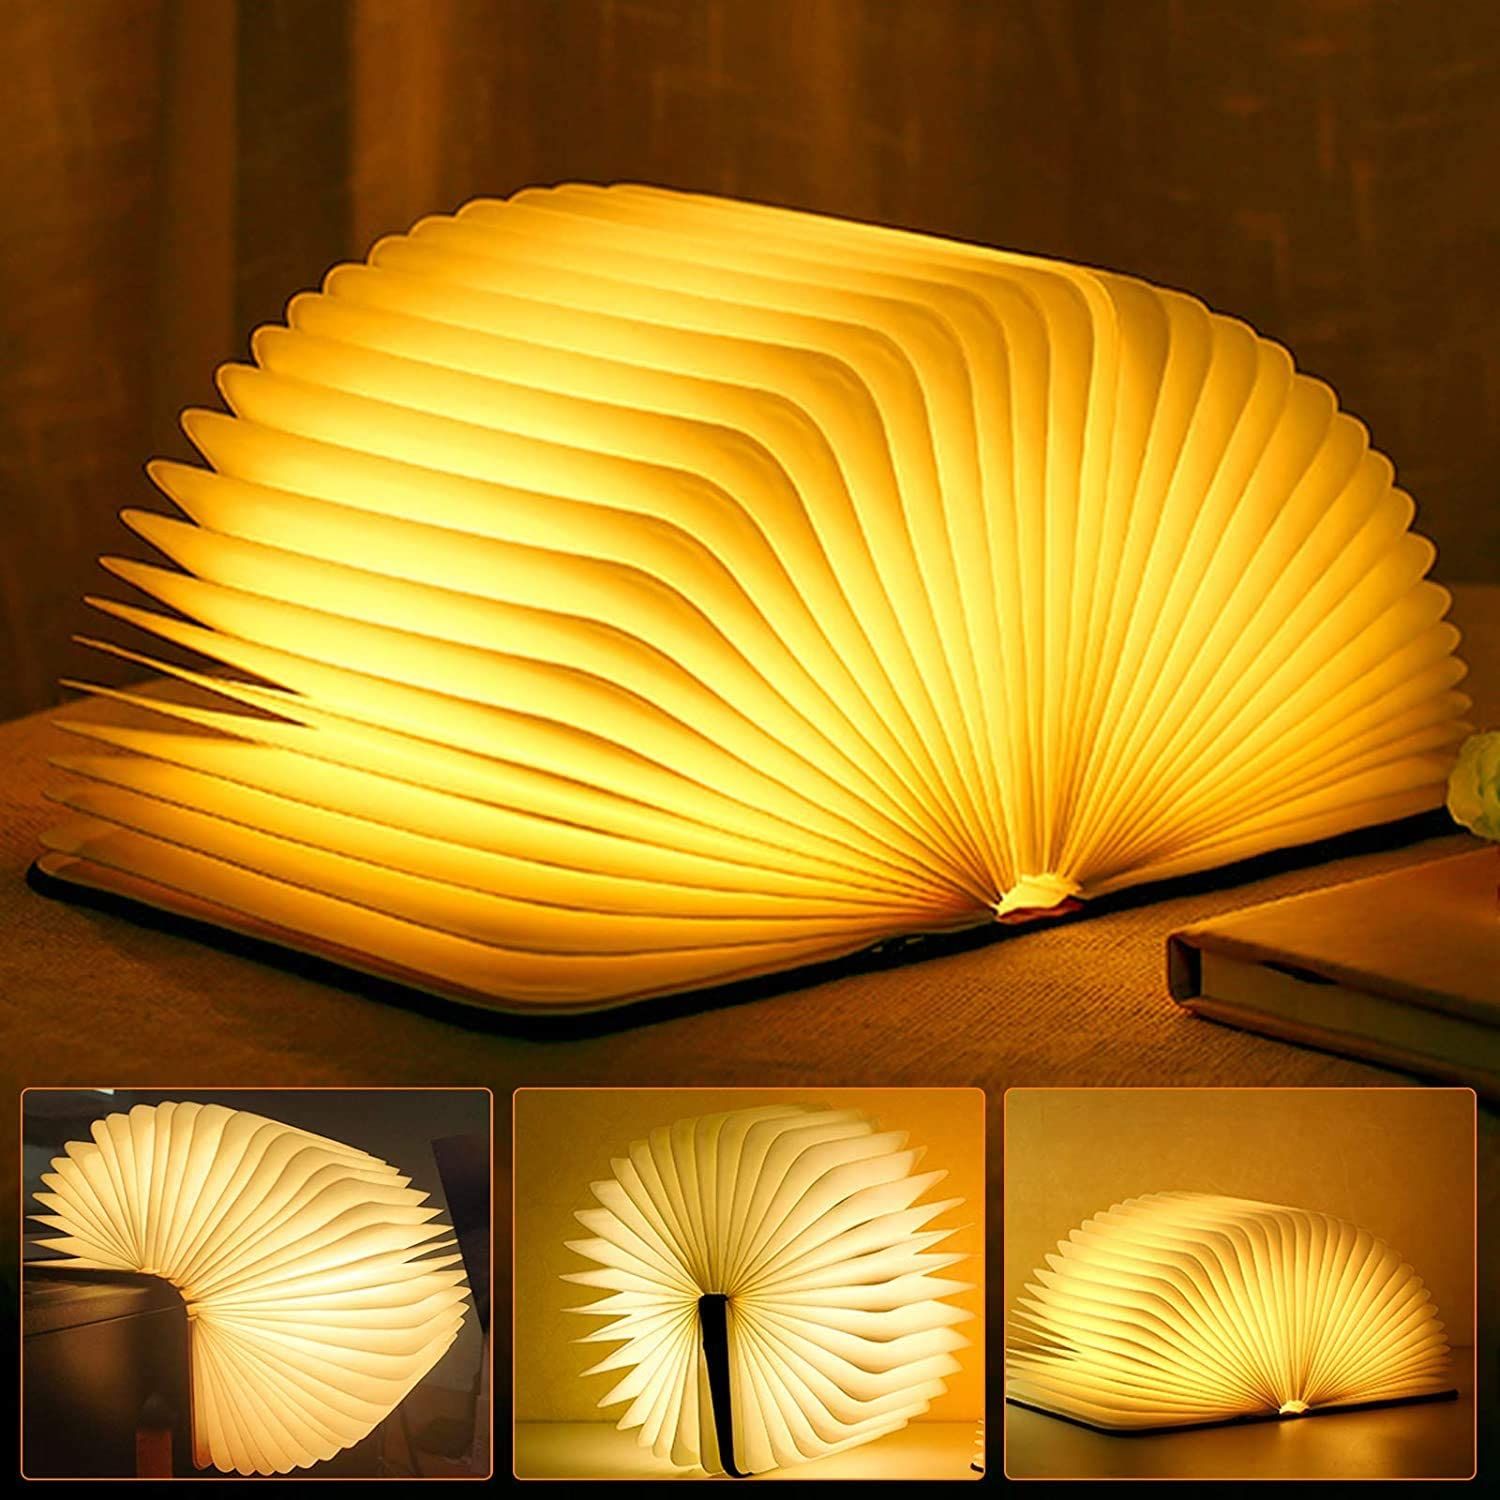 Image of a foldable wooden light in the shape of a book. 